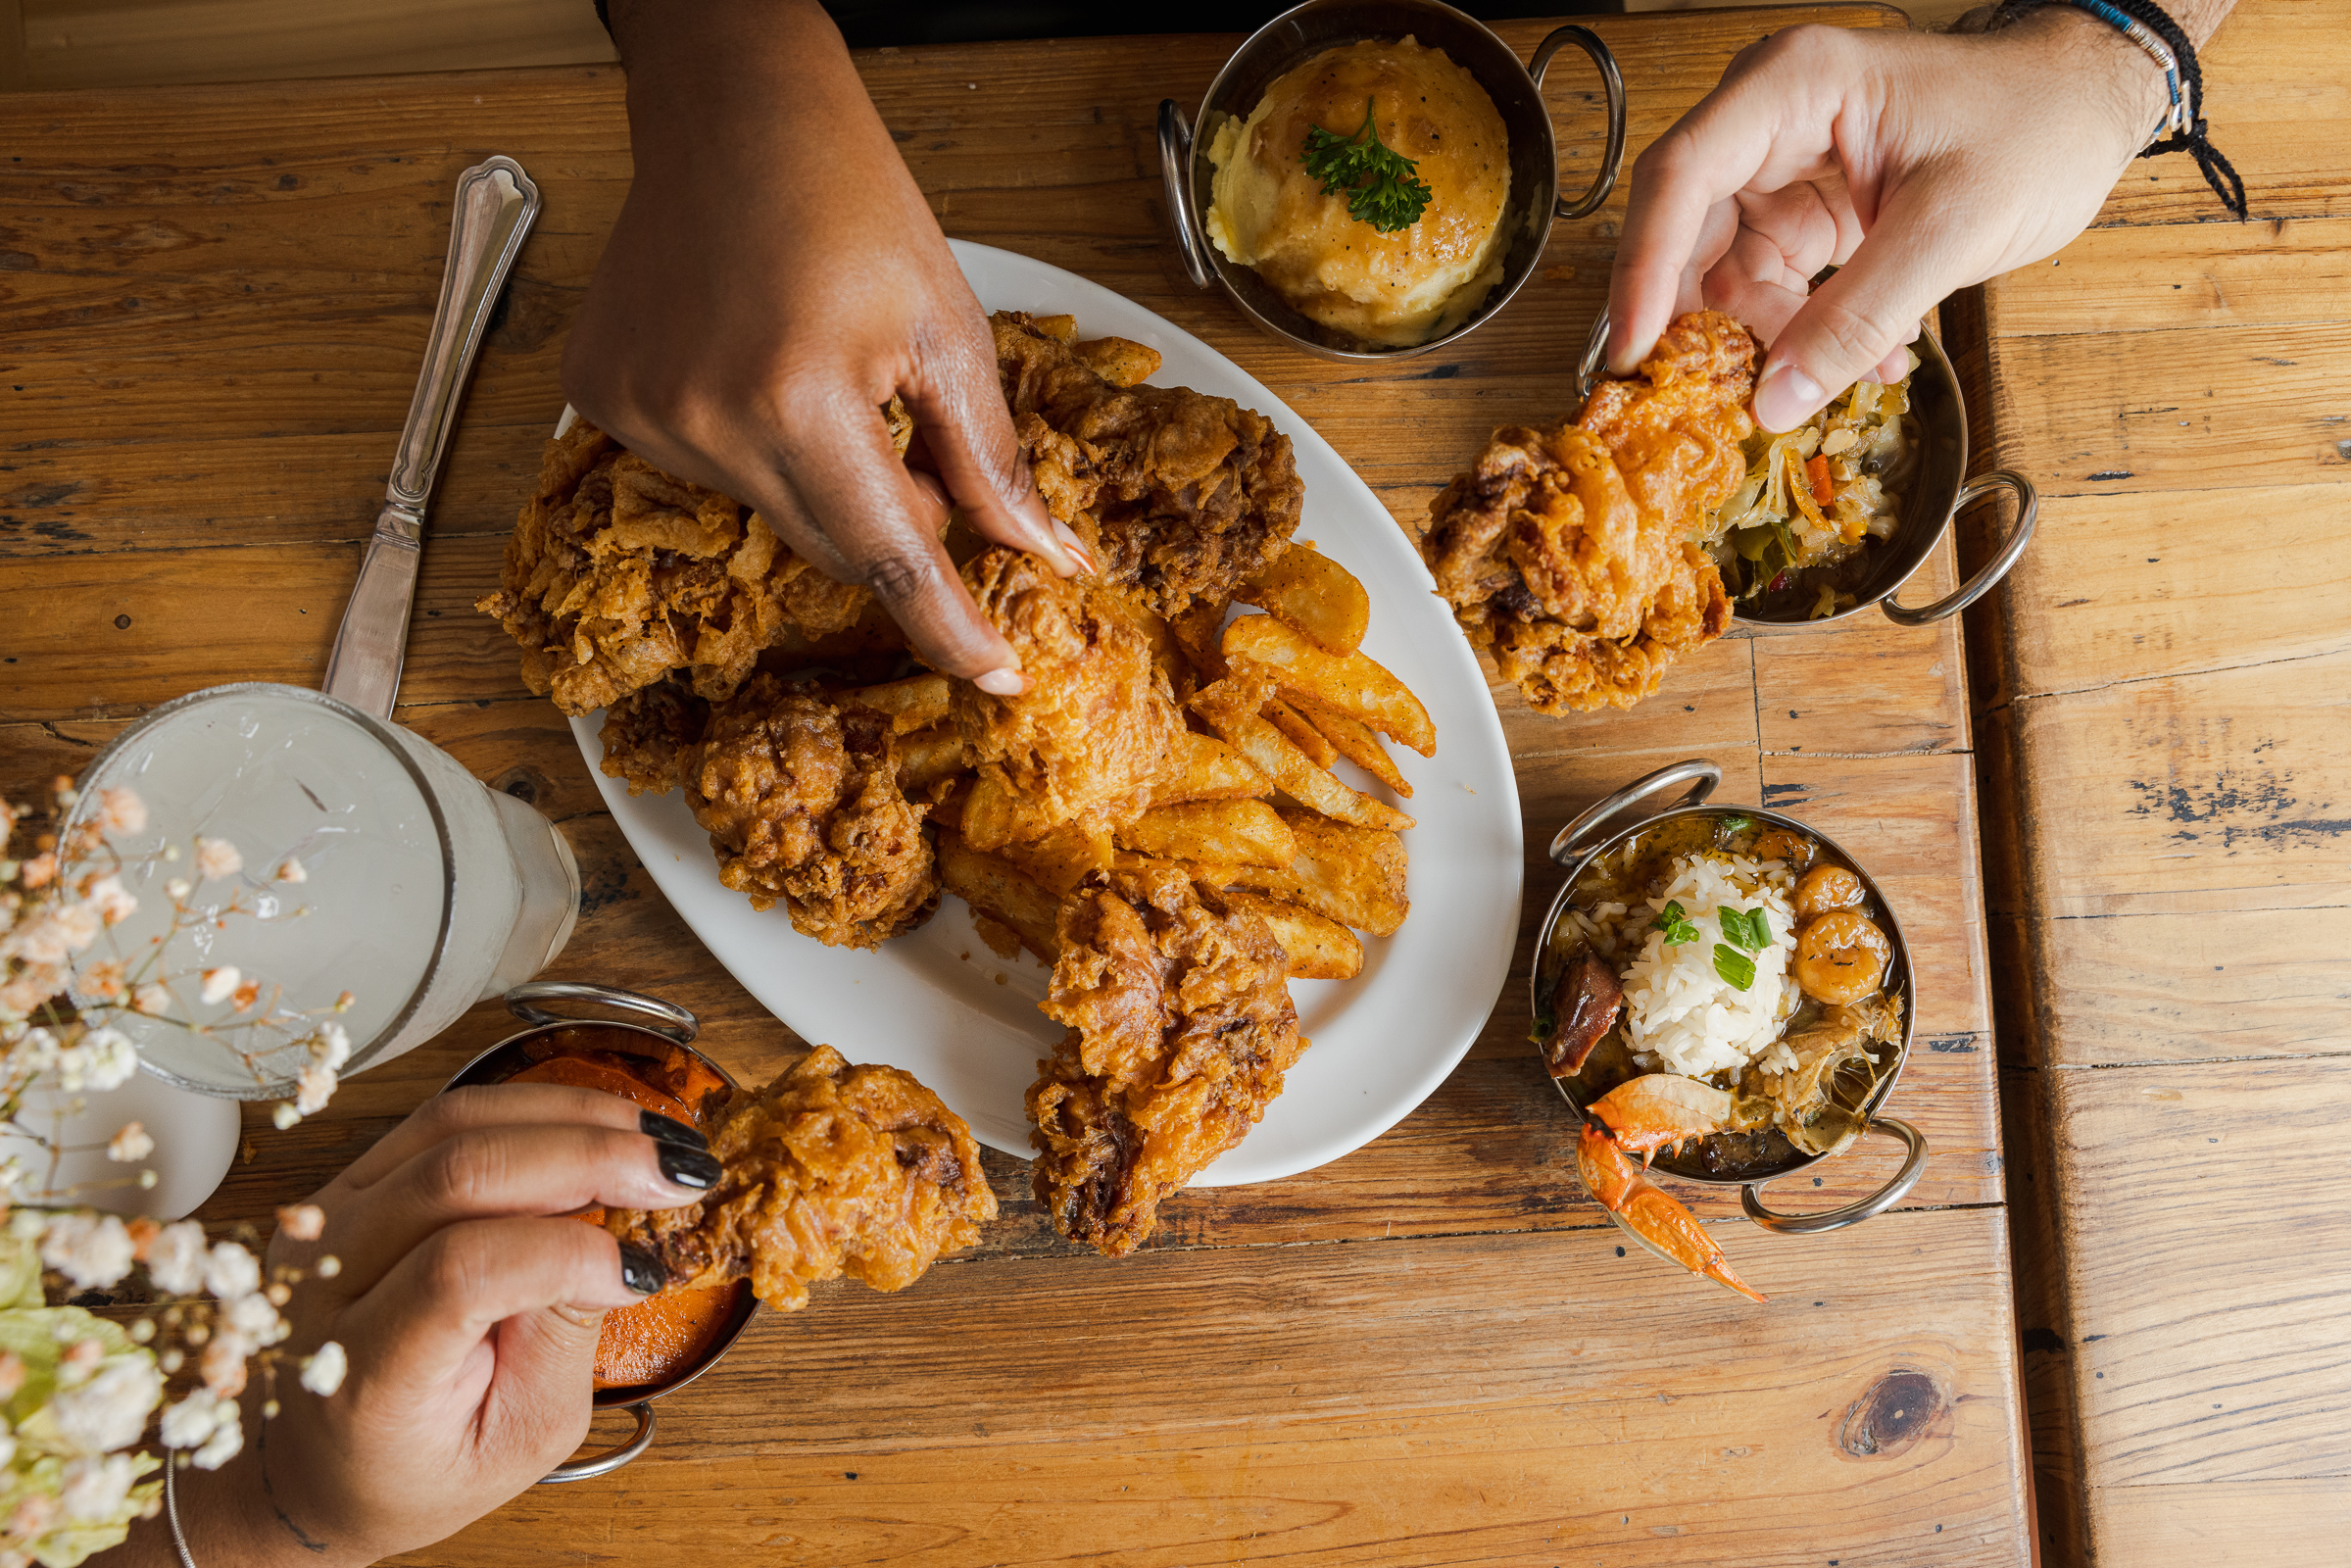 Hands reach in for fried chicken on a wide plate atop a wooden table.